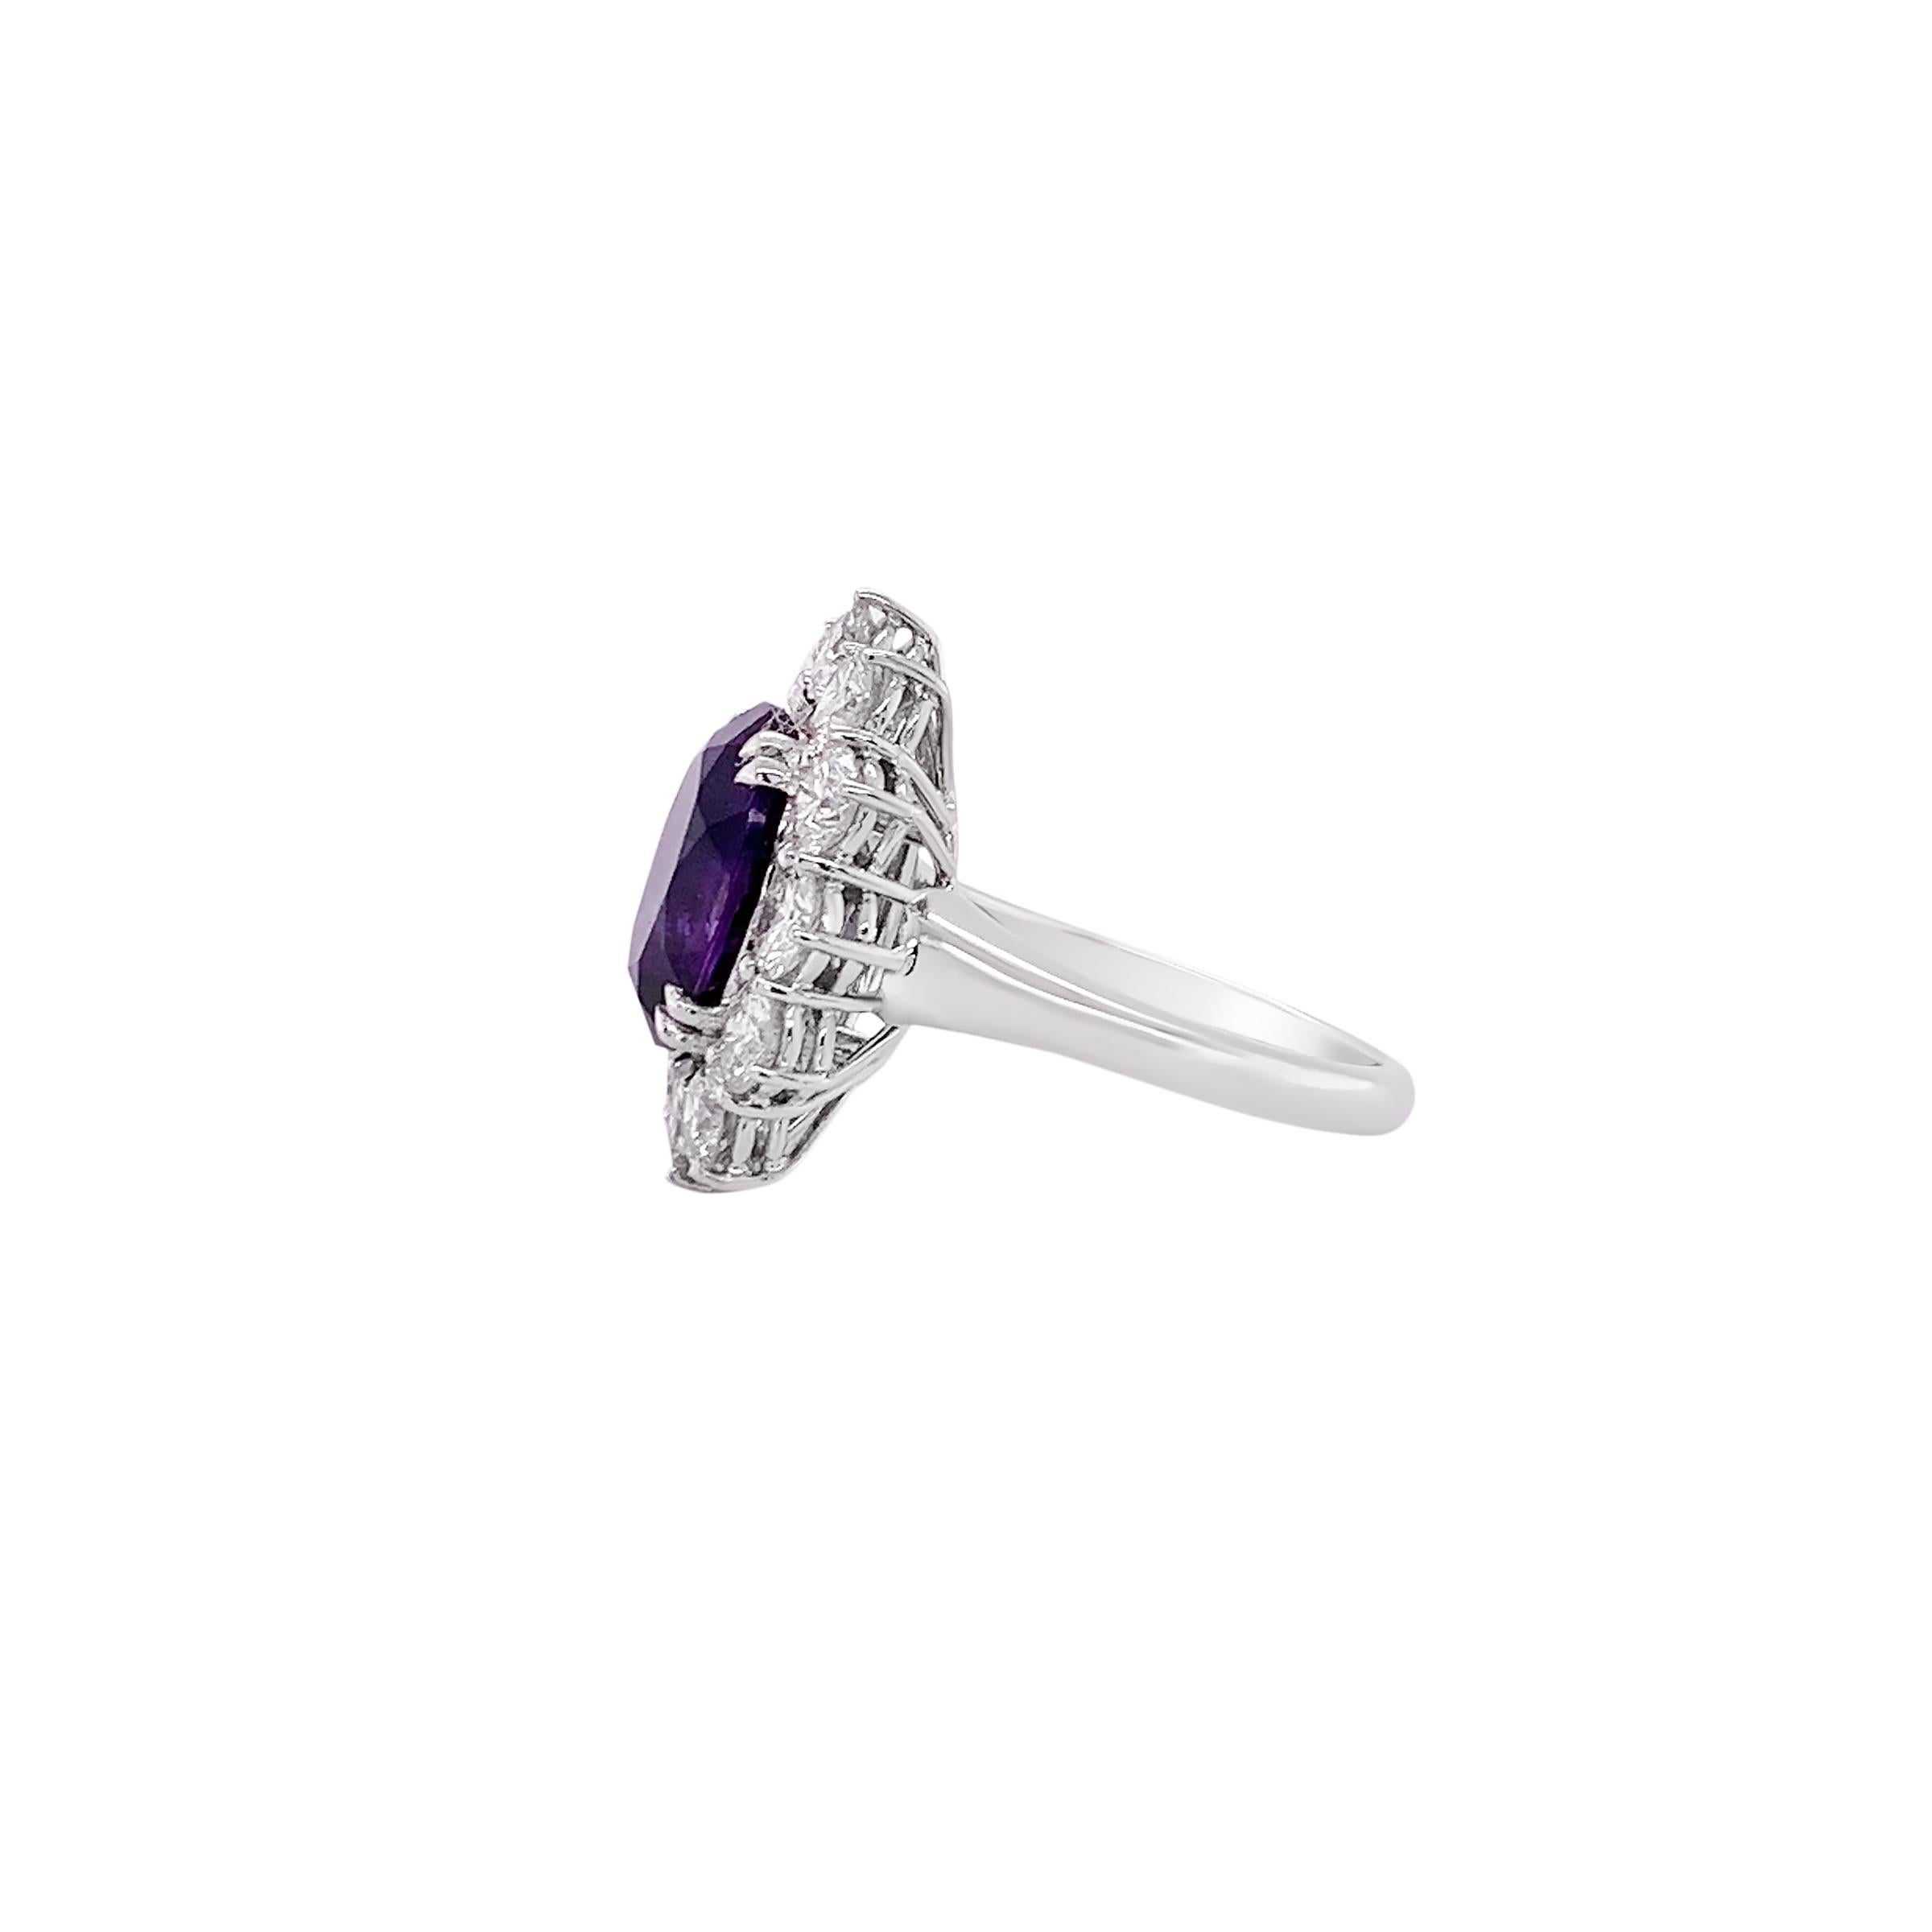 This ring features a magnificent vivid 4.40 carat amethyst at its center. This deep purple gemstone is encircled by a halo of meticulously selected natural diamonds totaling 3 carats. Each diamond has been hand selected for vvs quality to complement